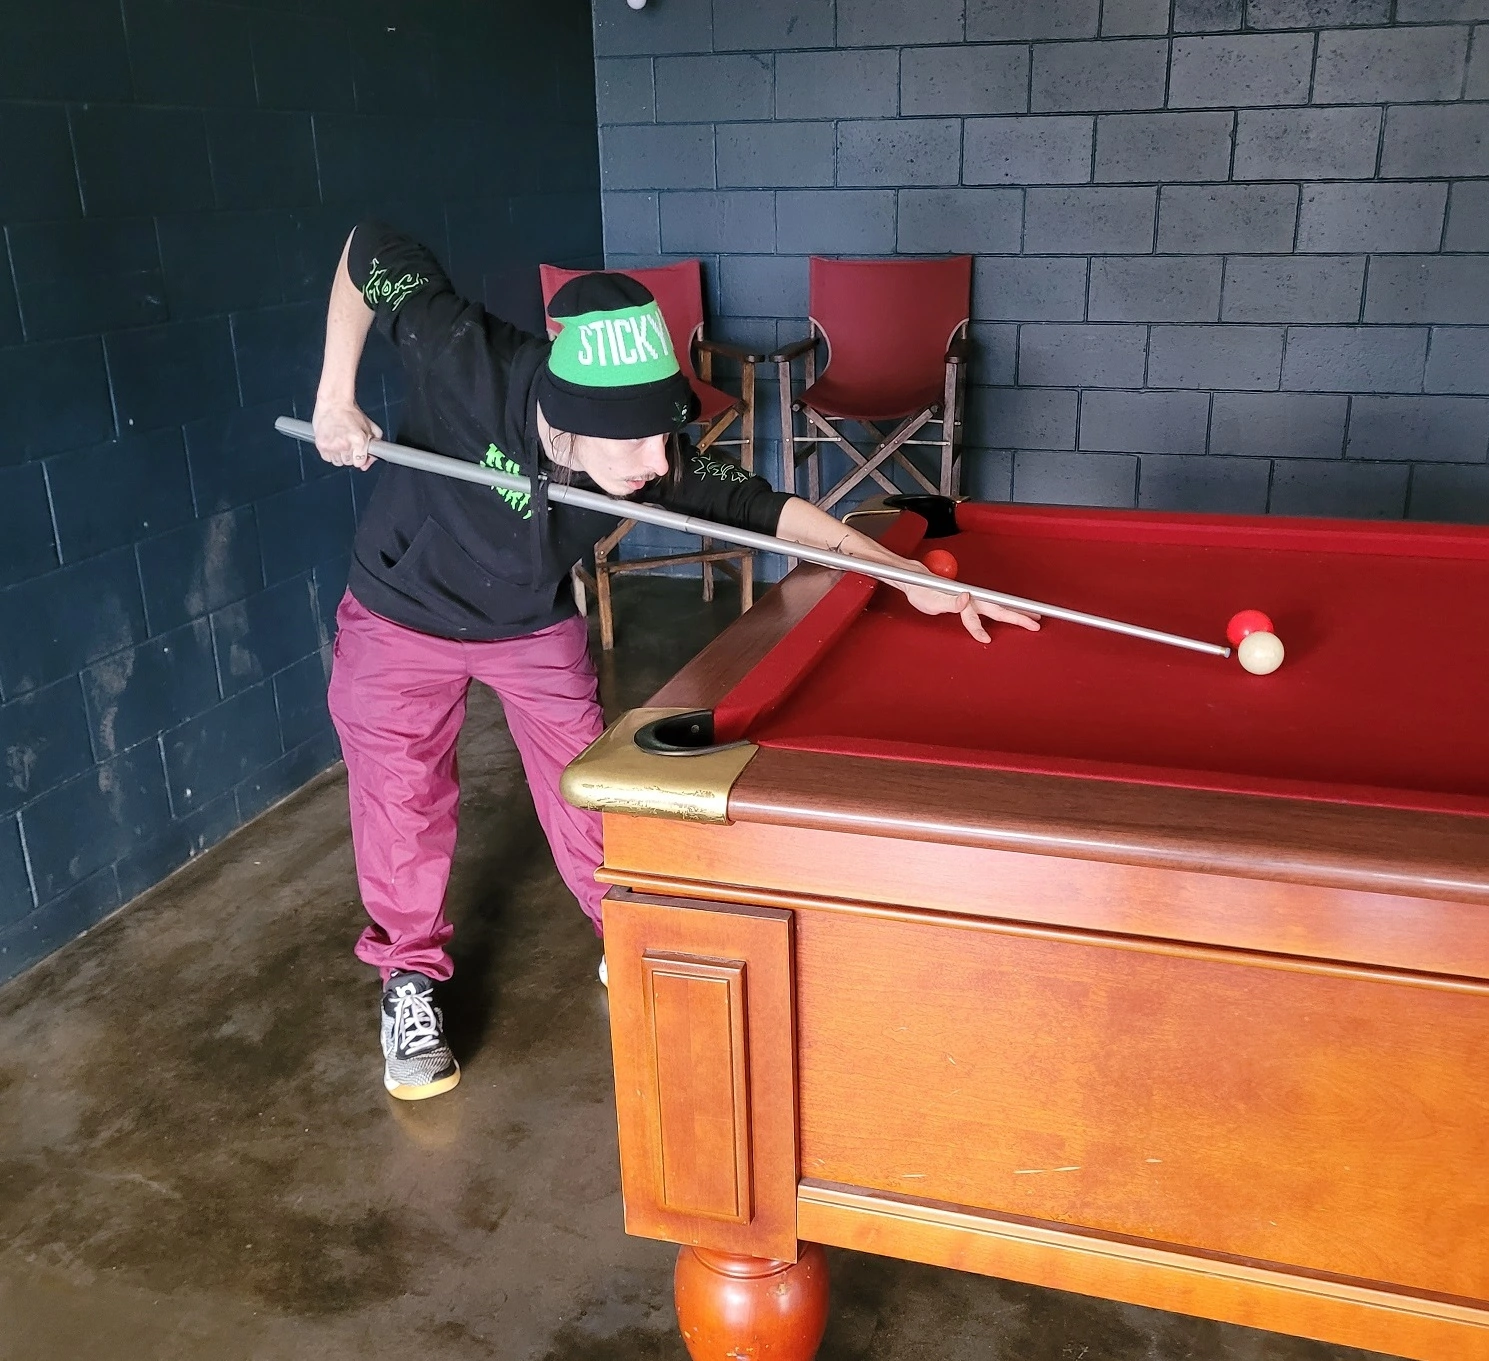 A young man playing pool